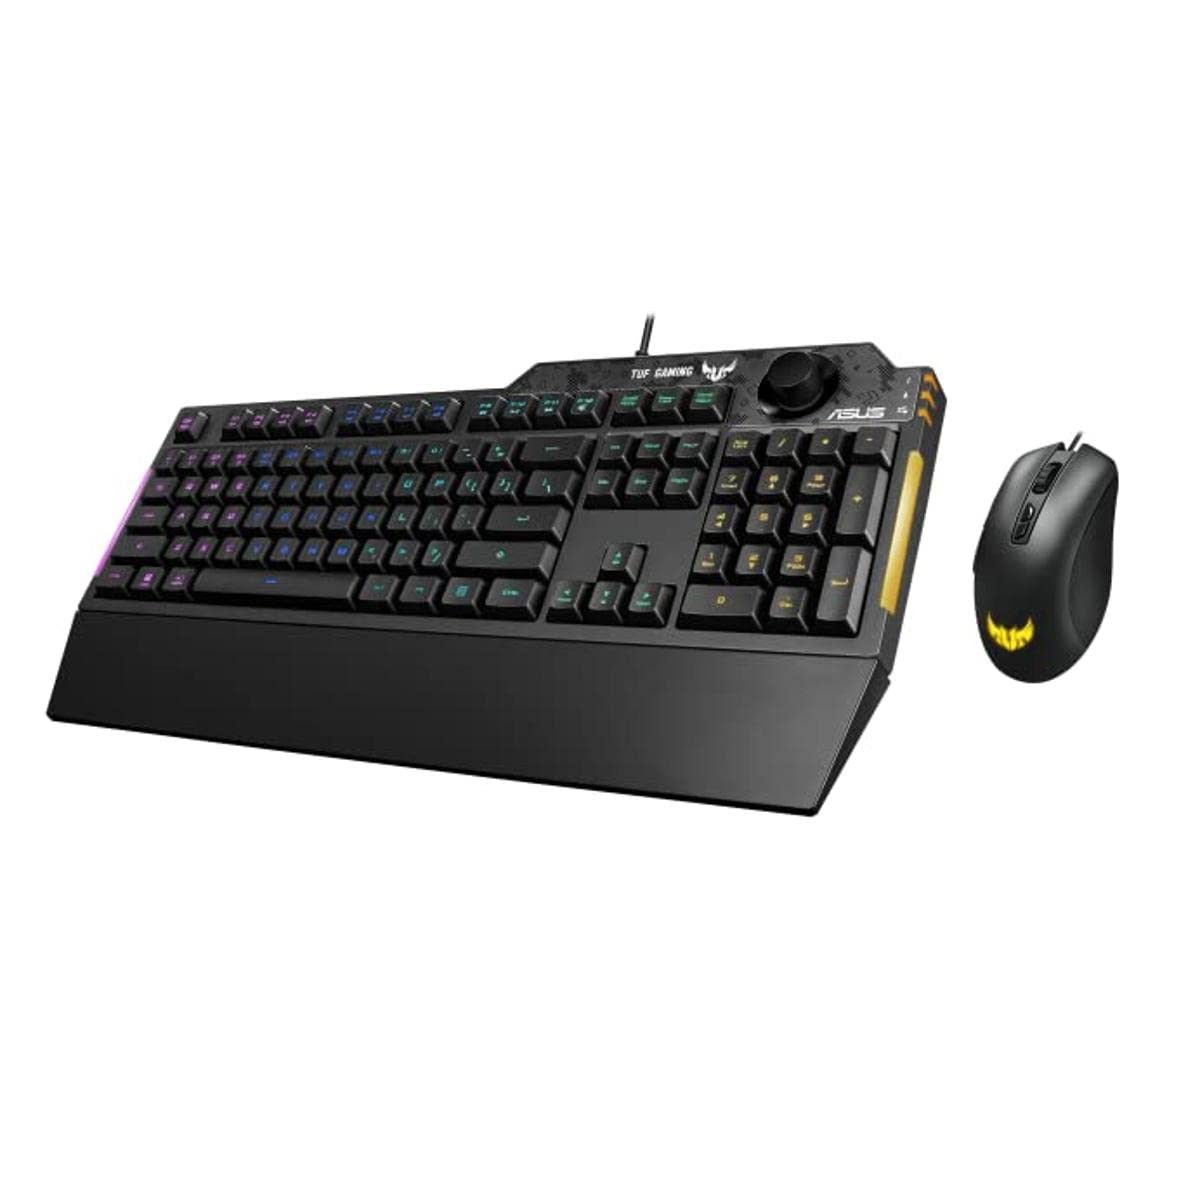 ASUS TUF Gaming K1 RGB Keyboard with Five-Zone RGB, Dedicated Volume knob and Spill-Resistance, Plus TUF Gaming M3 Optical Gaming Mouse with 7000 dpi Sensor, Seven programmable Buttons